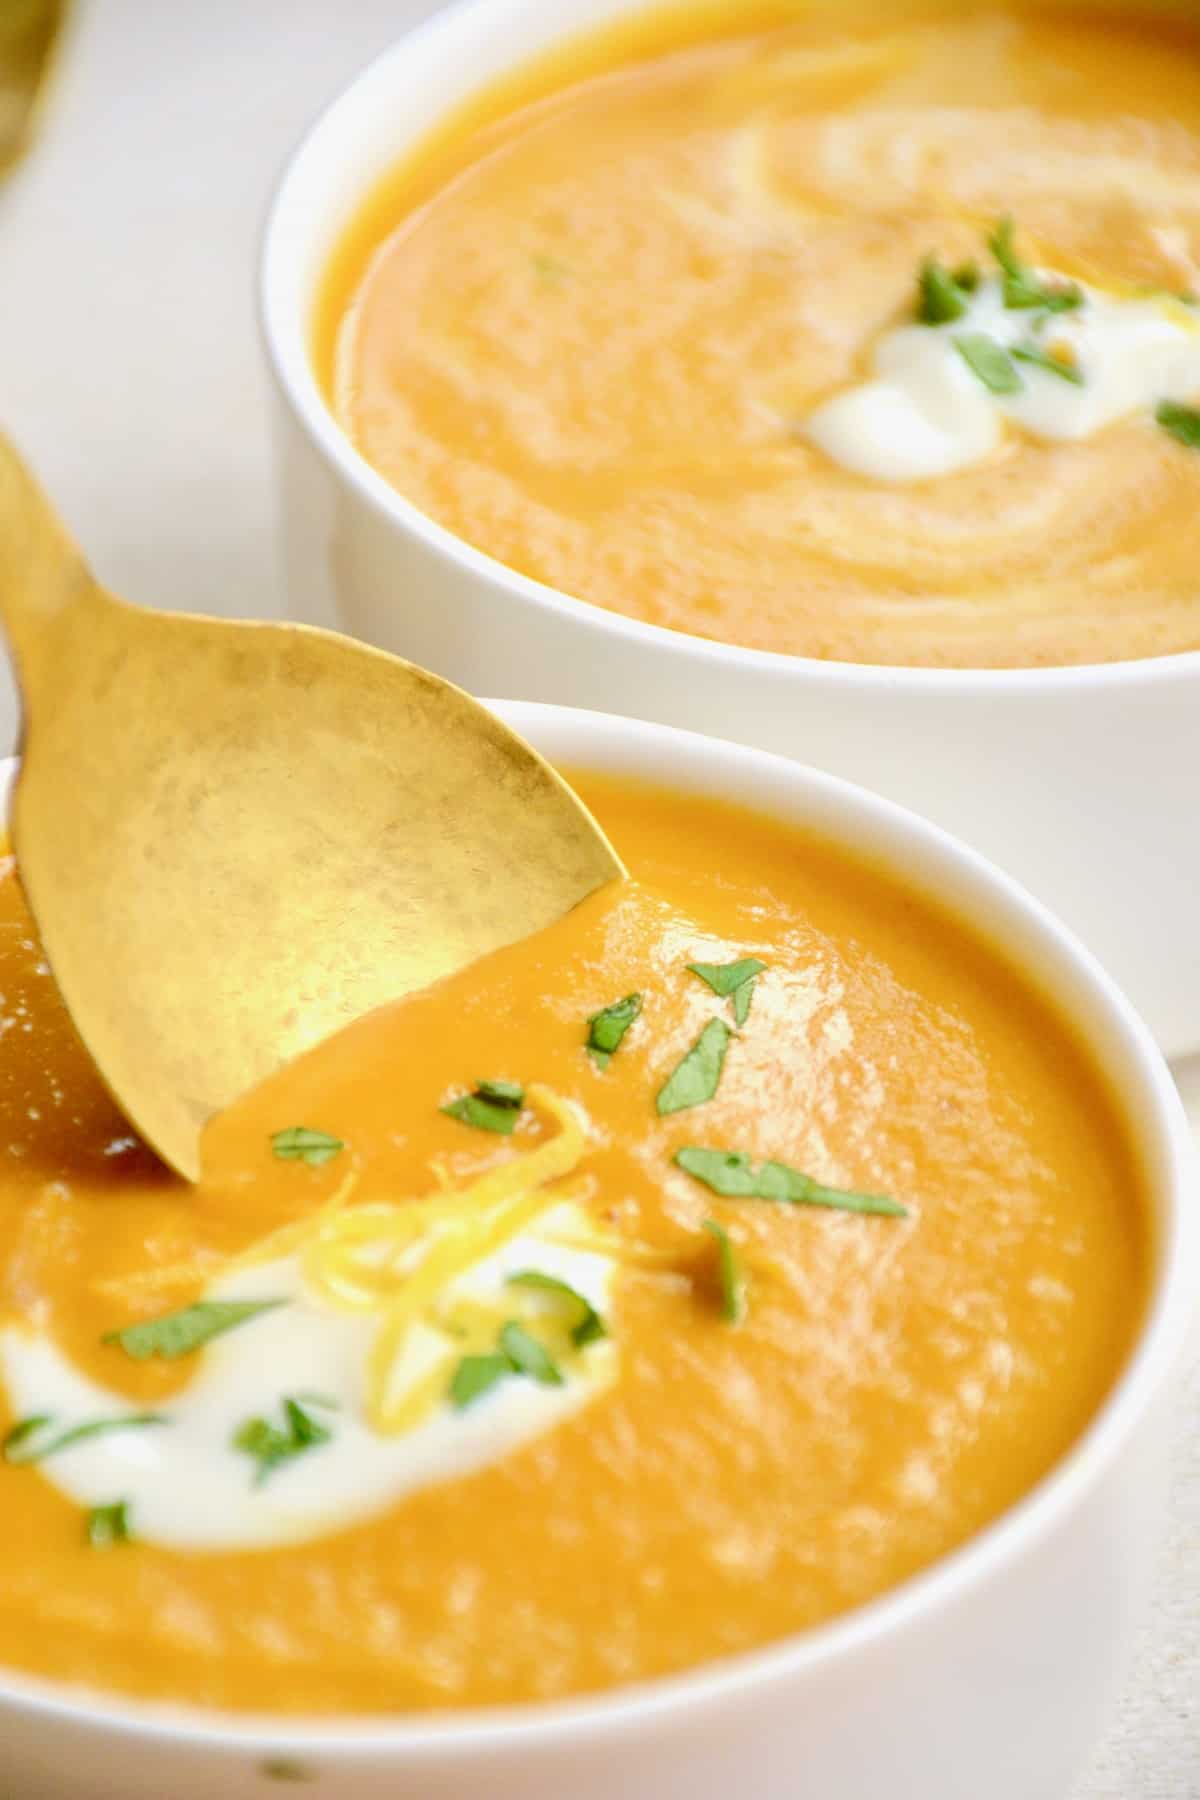 Dipping a spoon into the thick, orange coloured soup.